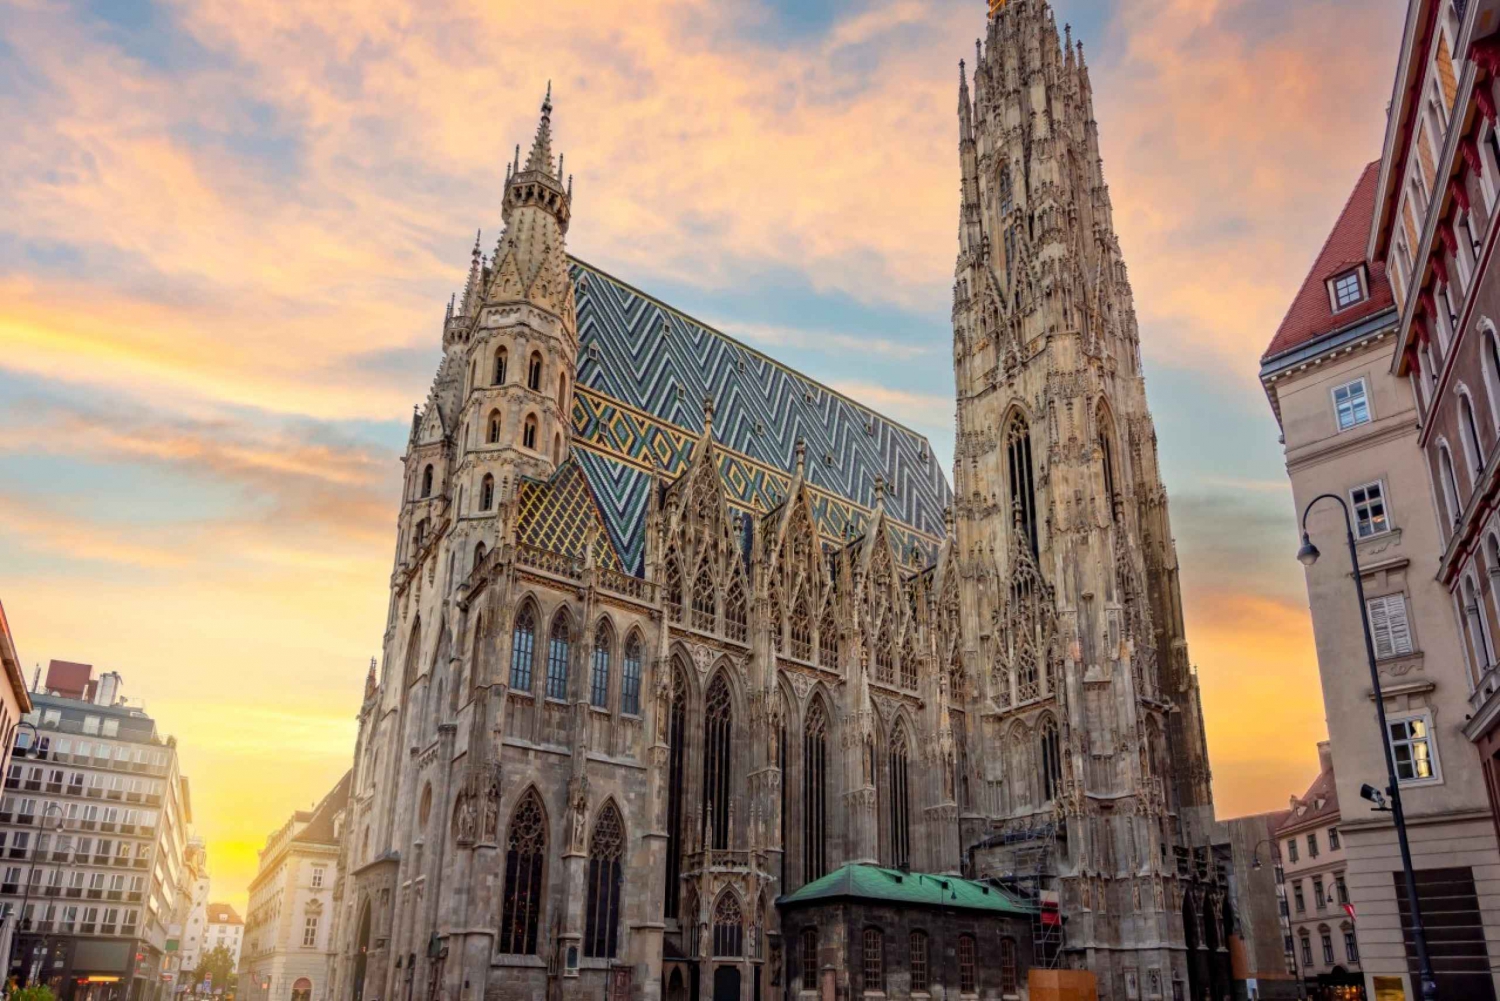 Vienna: Tour of the Old Town and St. Stephen's Cathedral